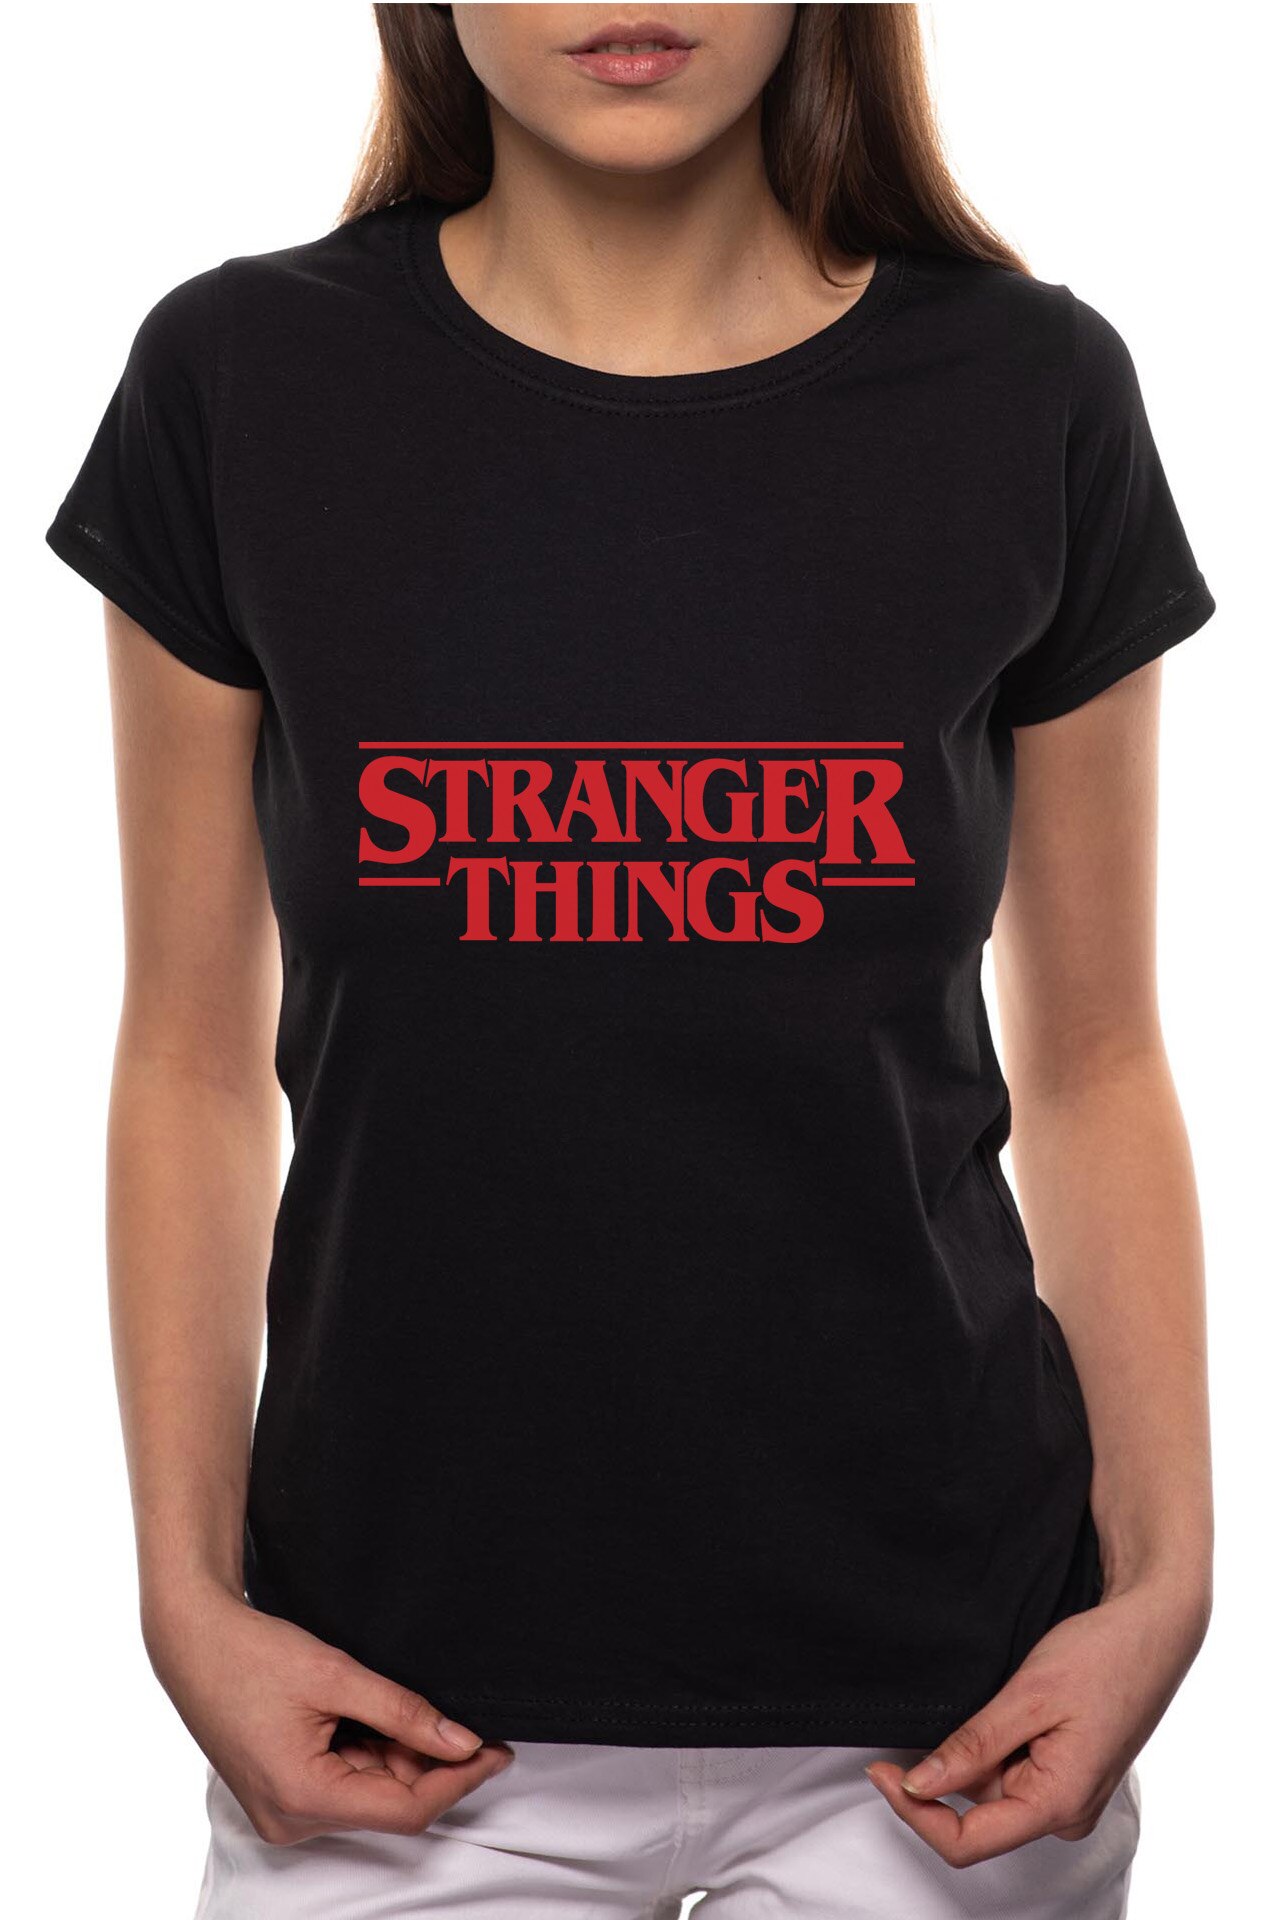 Clunky finished Movement Tricou dama, Stranger Things, 100% Bumbac, B173, Negru, M - eMAG.ro